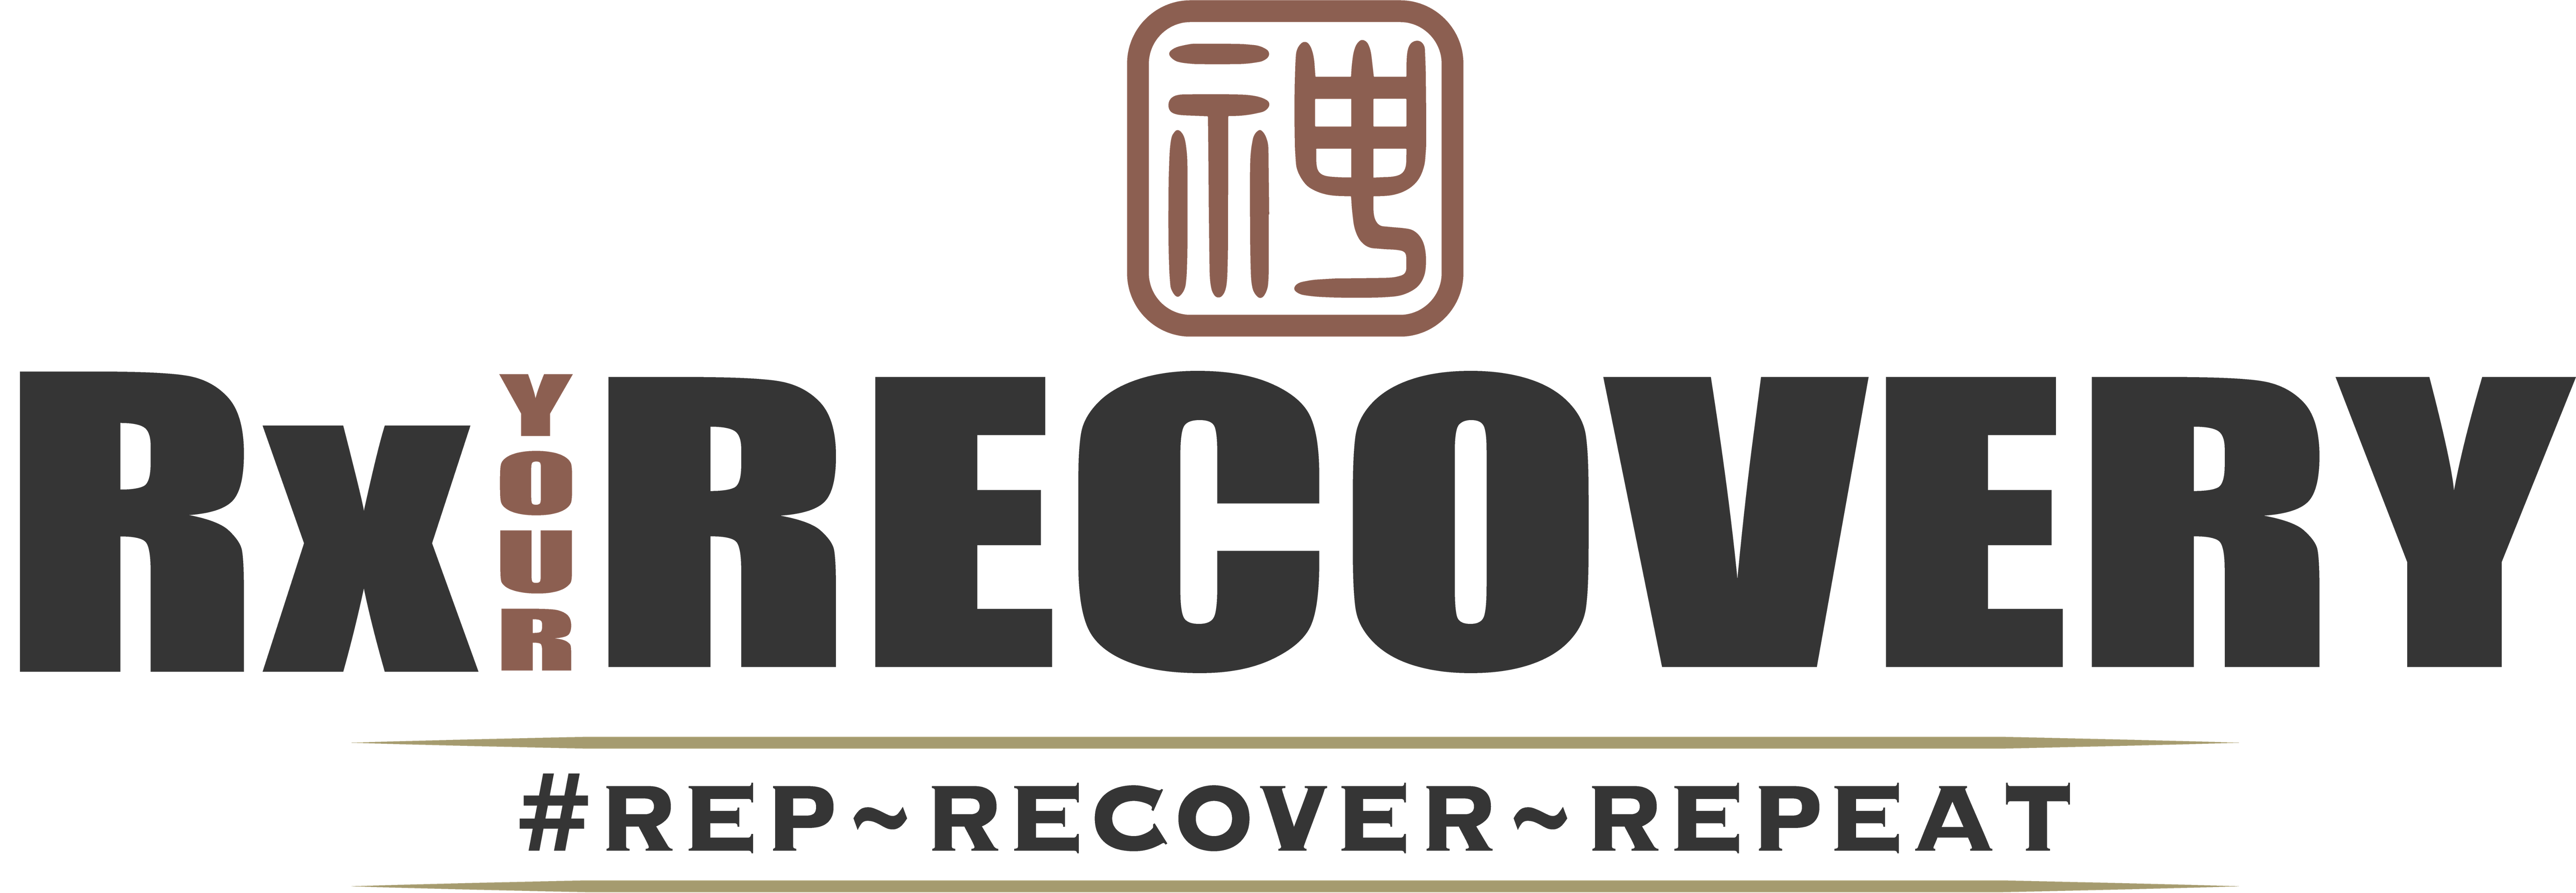 RxRecovery Black